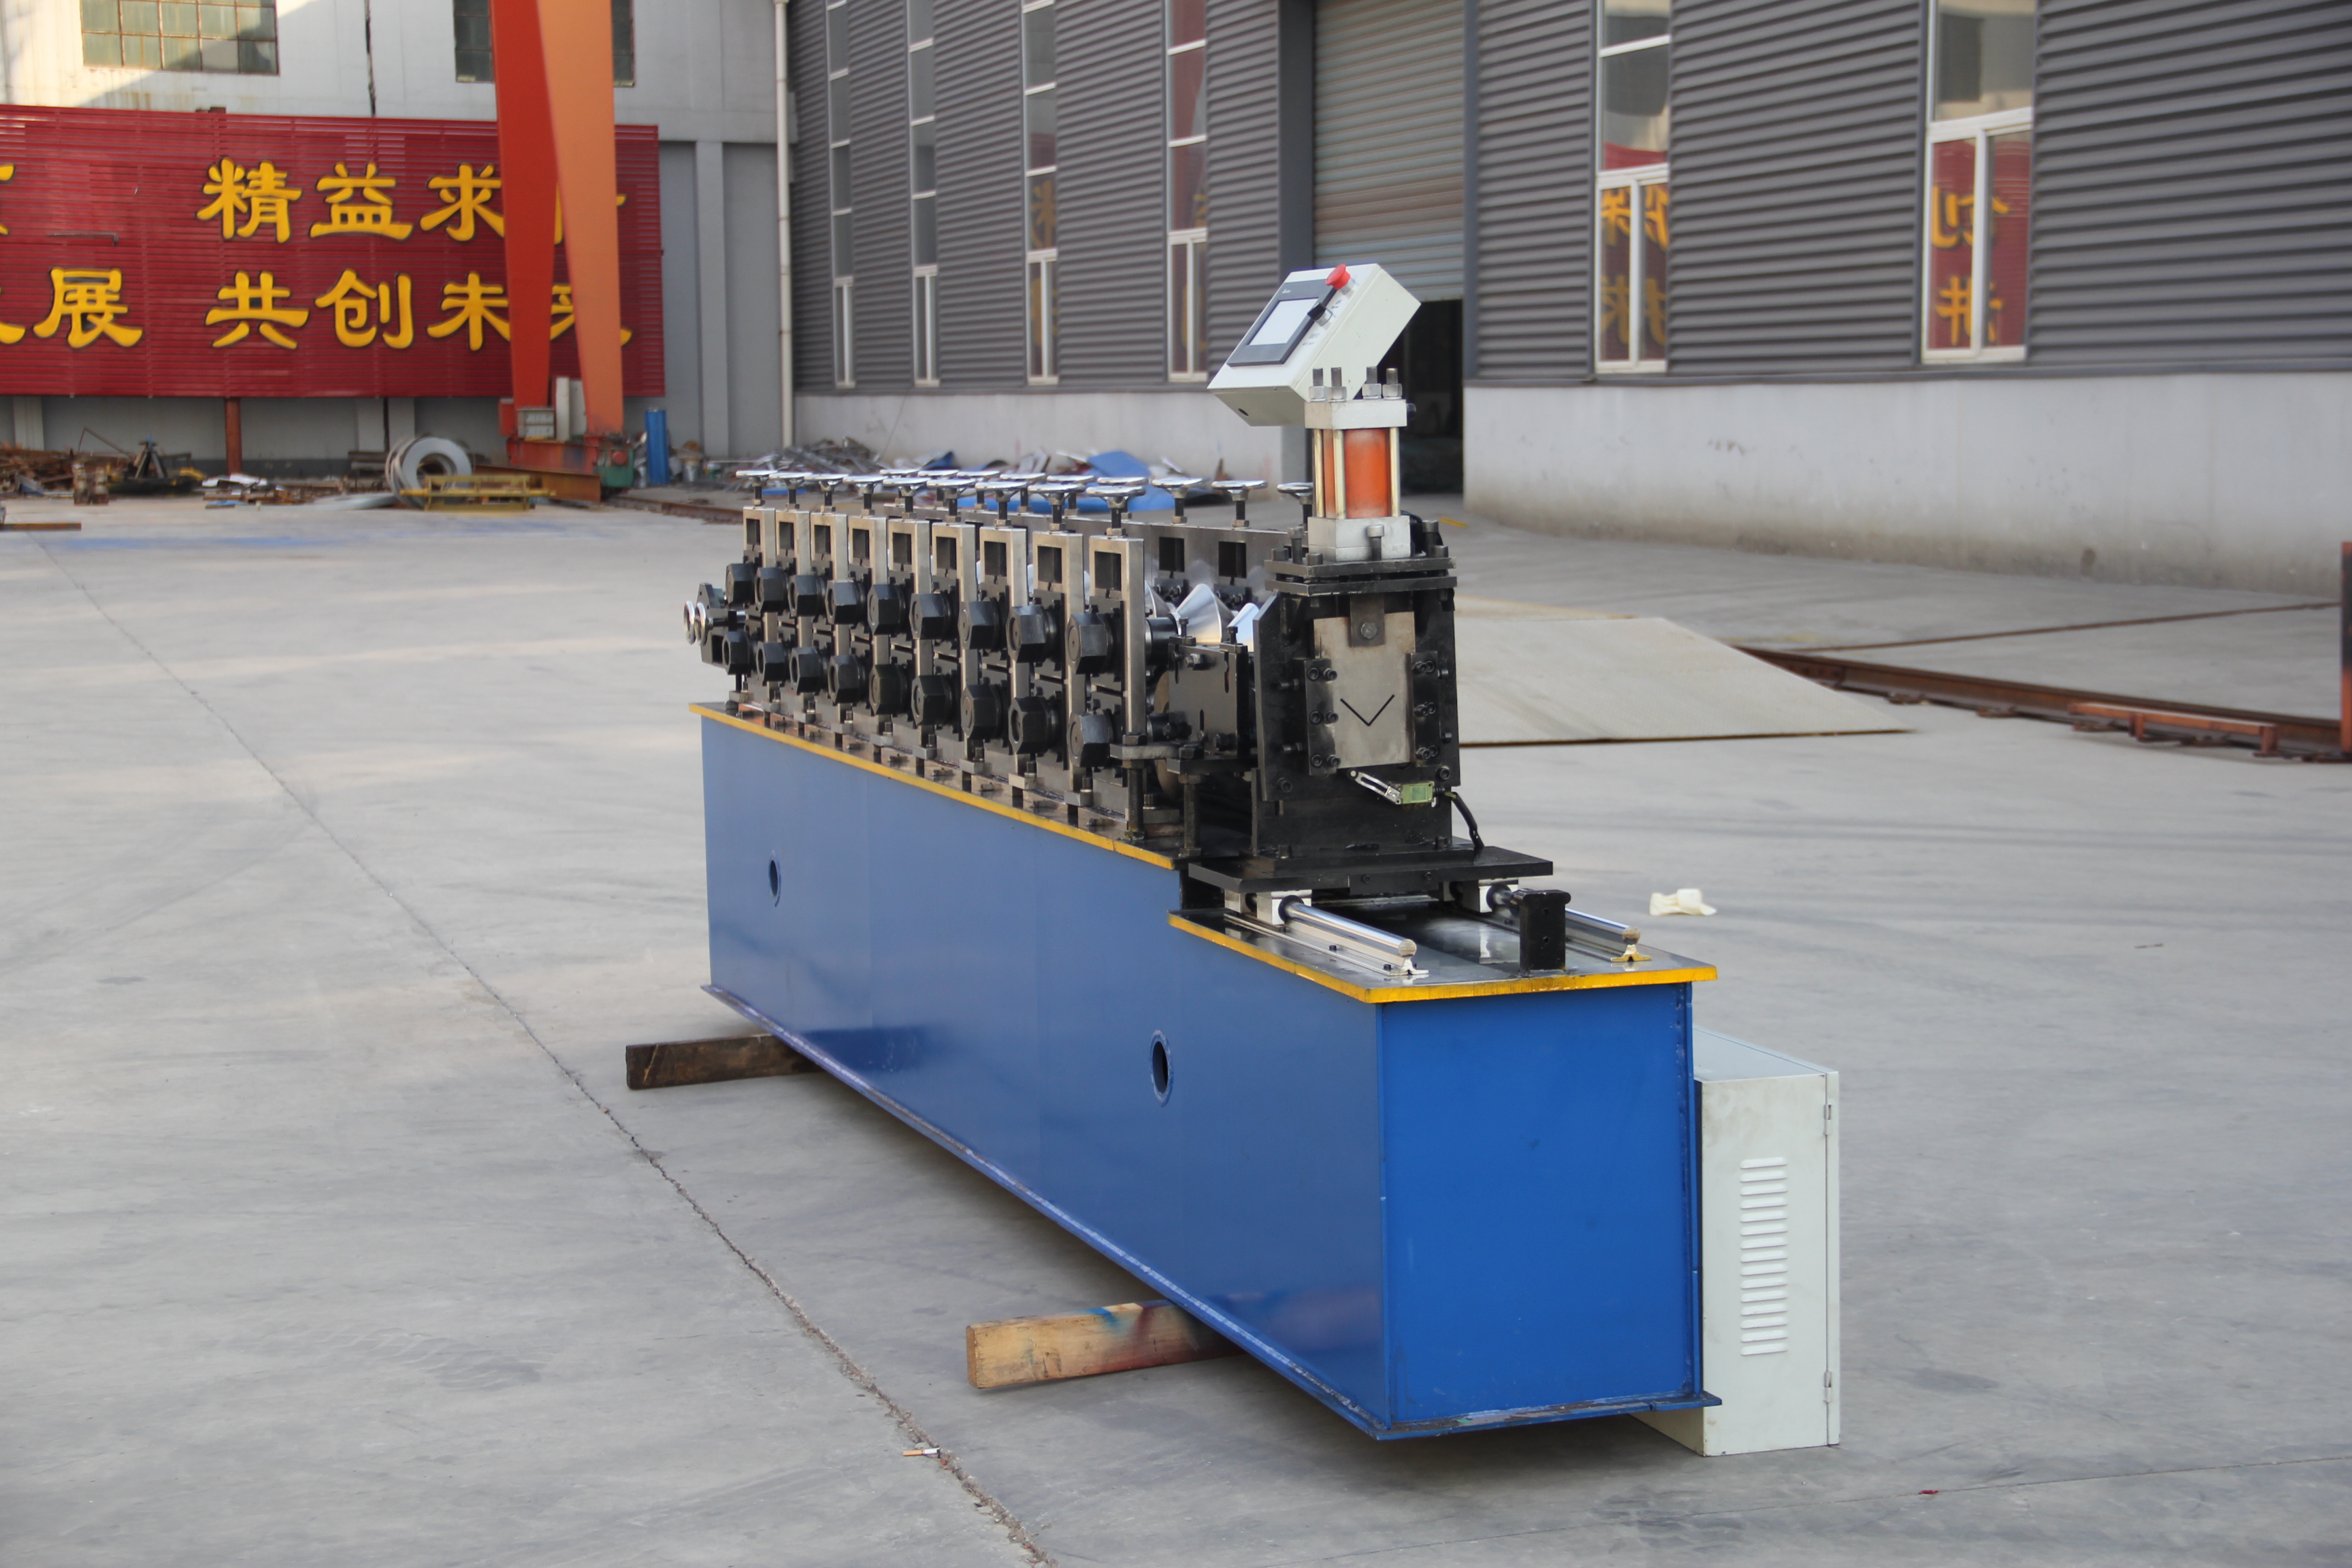 Light Keel Angle Roll Forming Machines Wall Angle L Keel Machine Corner Bead Light Keel,Angle Iron Roll Forming machine